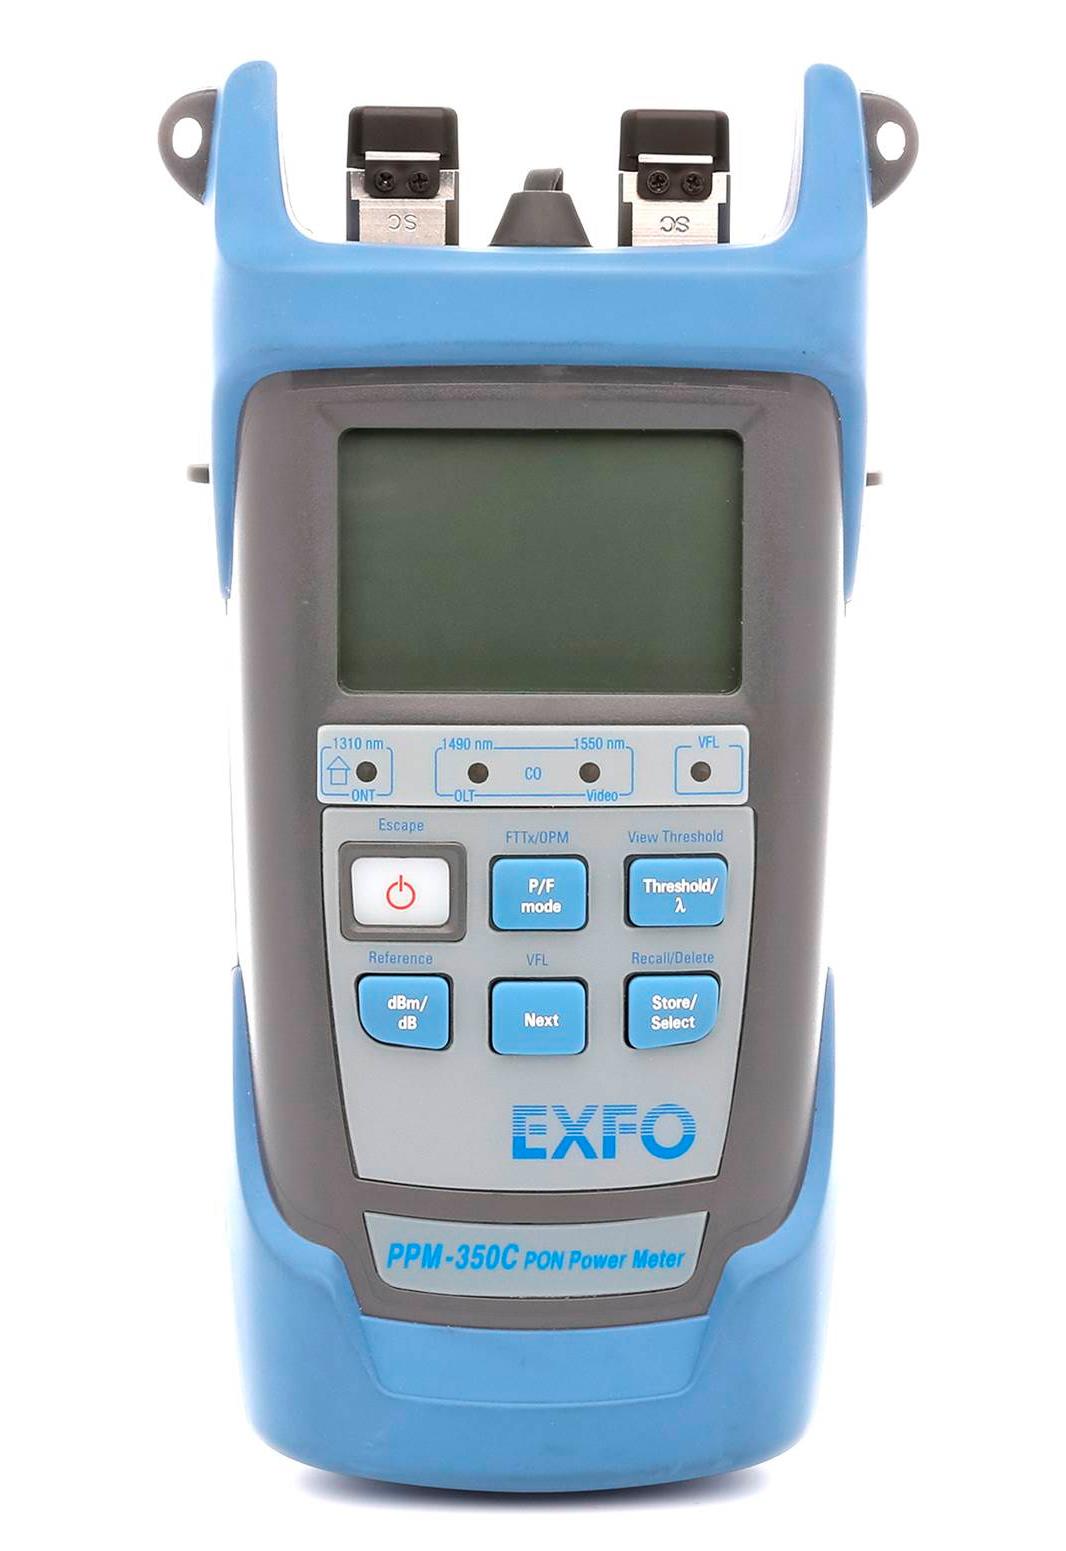 EXFO PPM-352C-EA just arrived